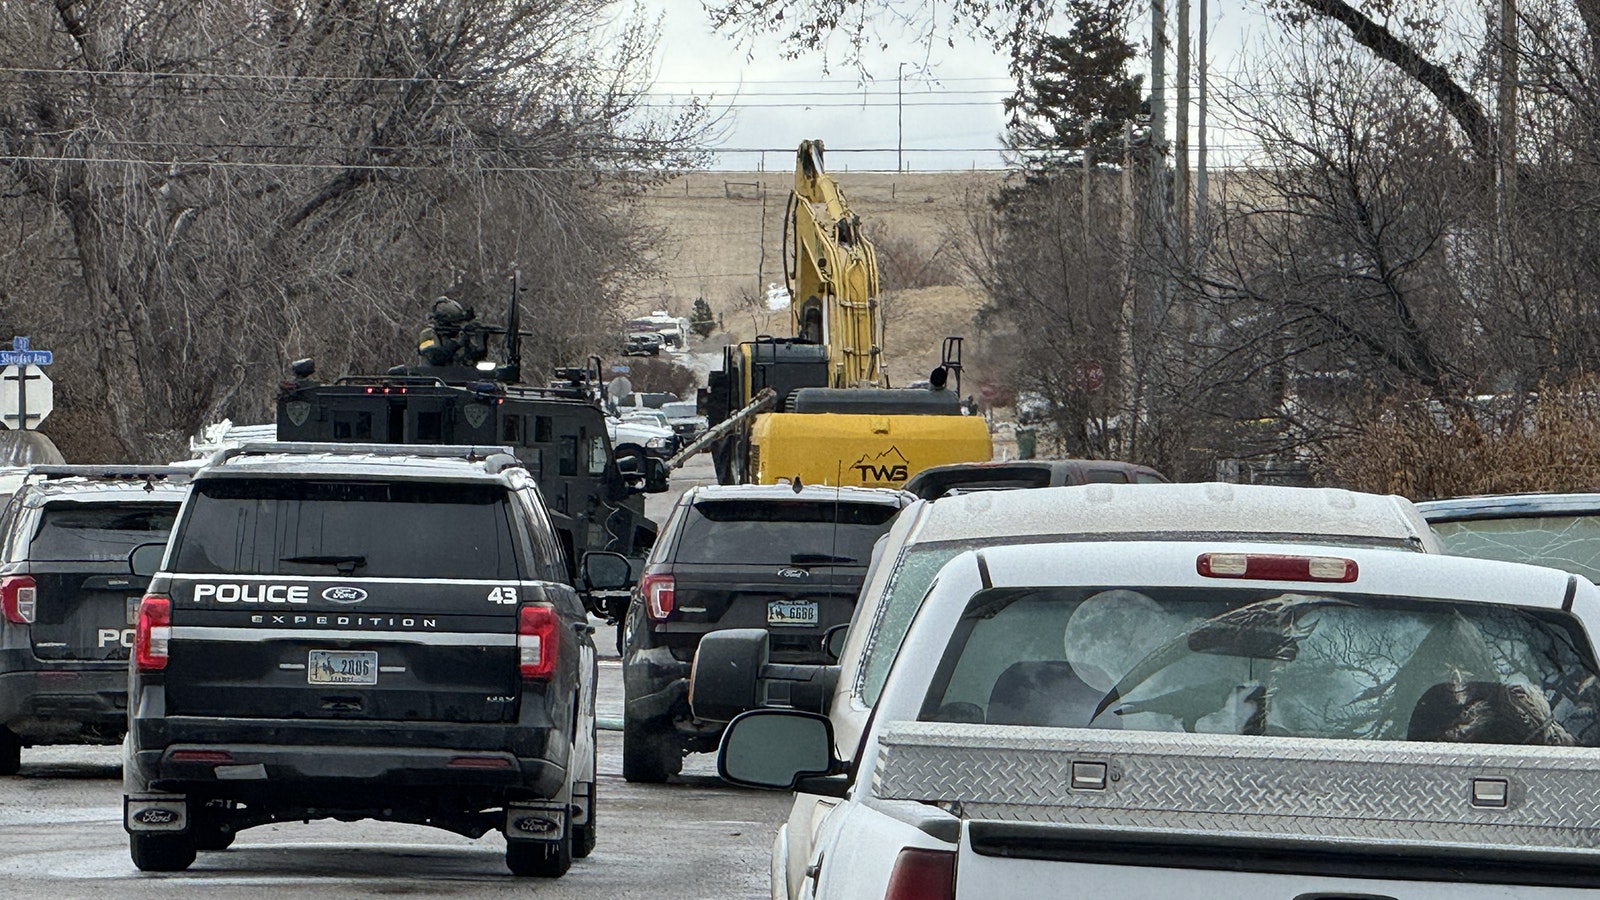 Scenes Wednesday from a standoff in Sheridan between law enforcement and a man suspected of shooting and killing a police officer.